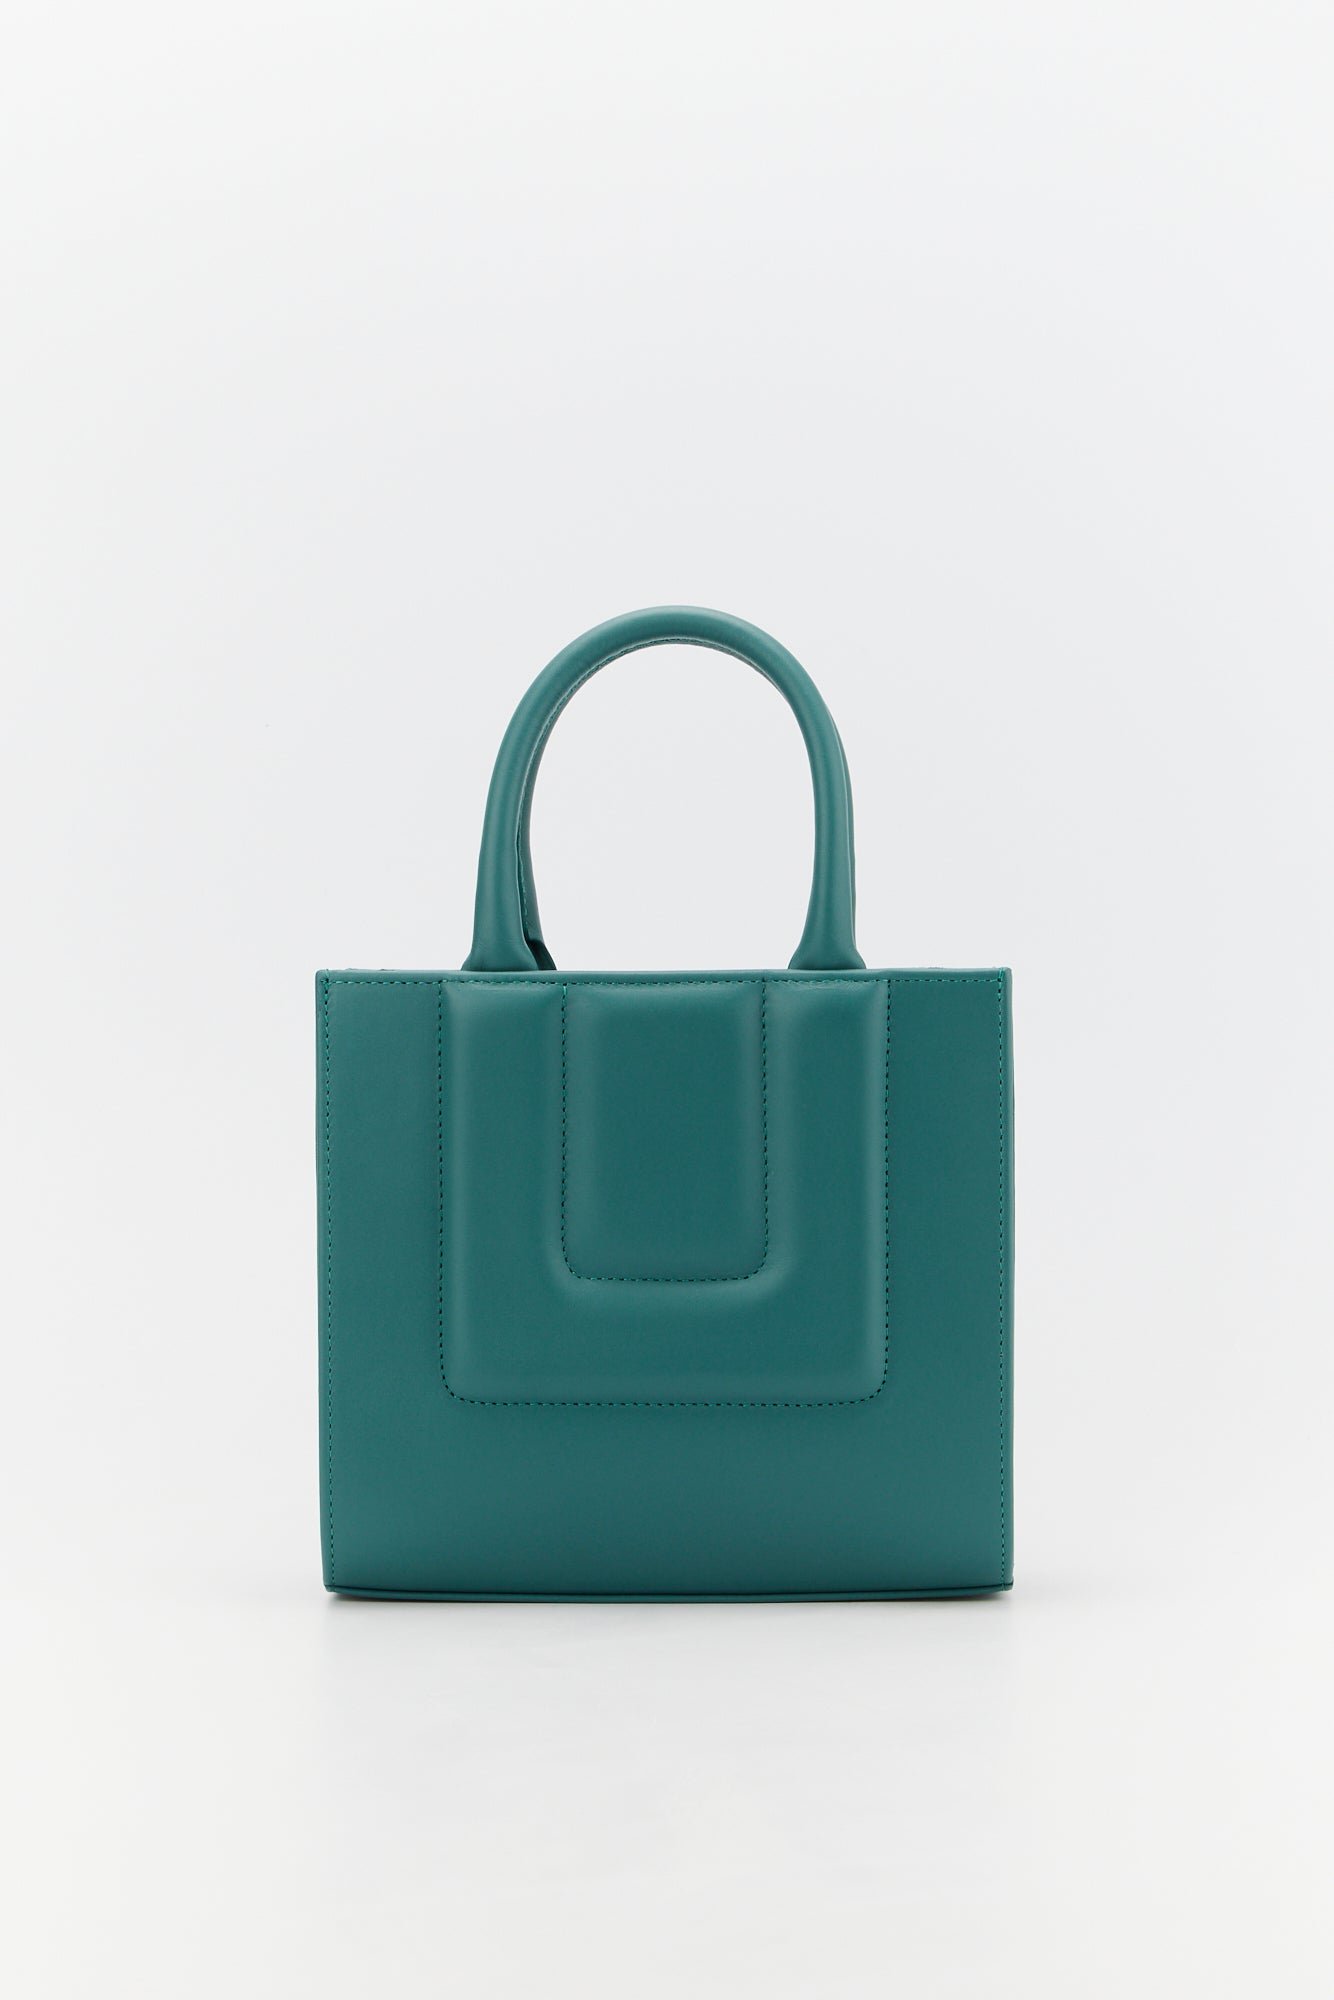 PEACOCK BLUE Leather Structured Mini Tote